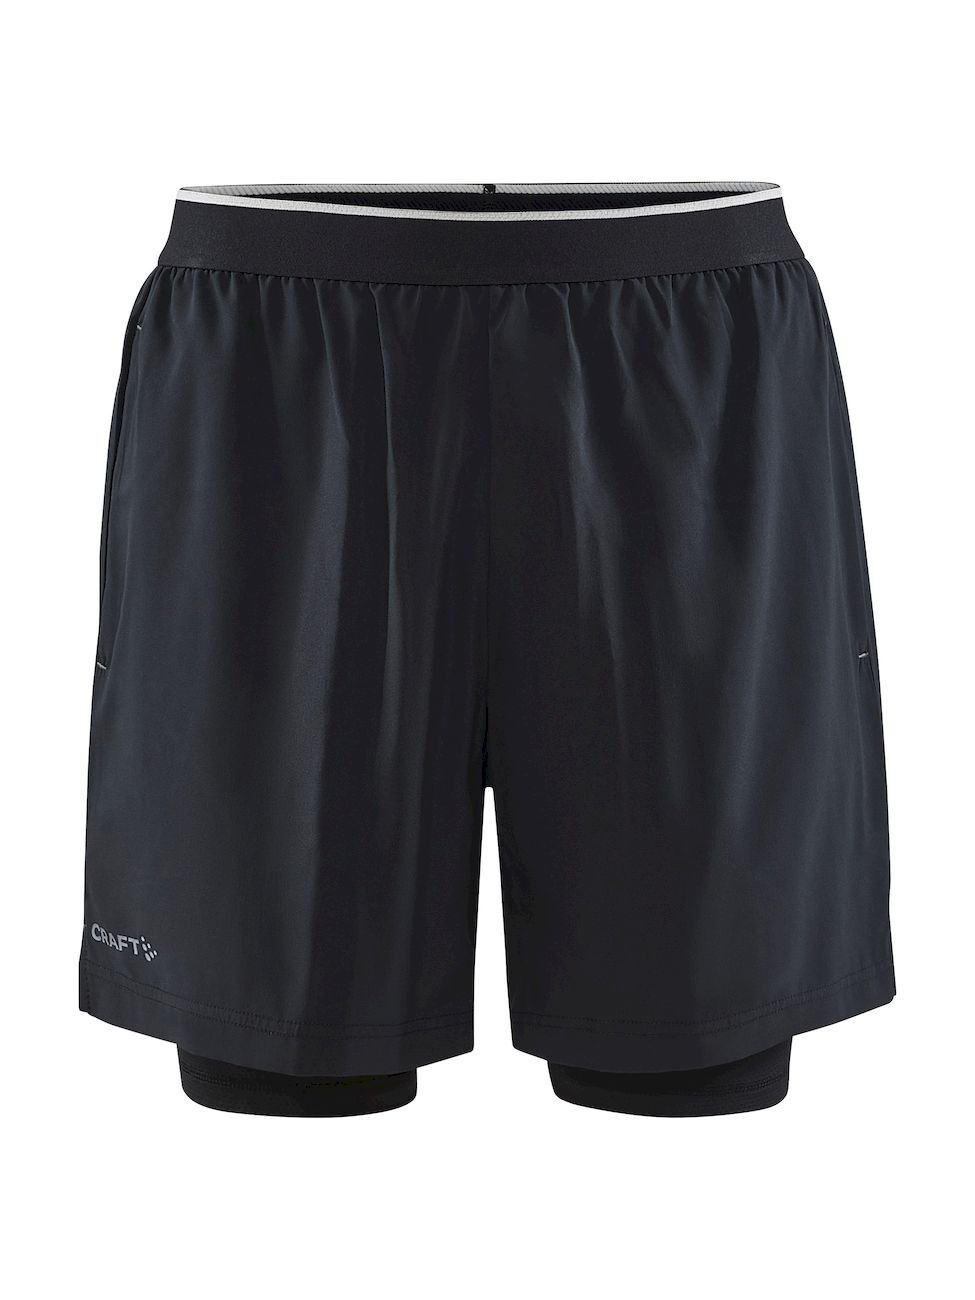 Craft ADV Charge 2-In-1 Stretch Short - Running shorts - Men's